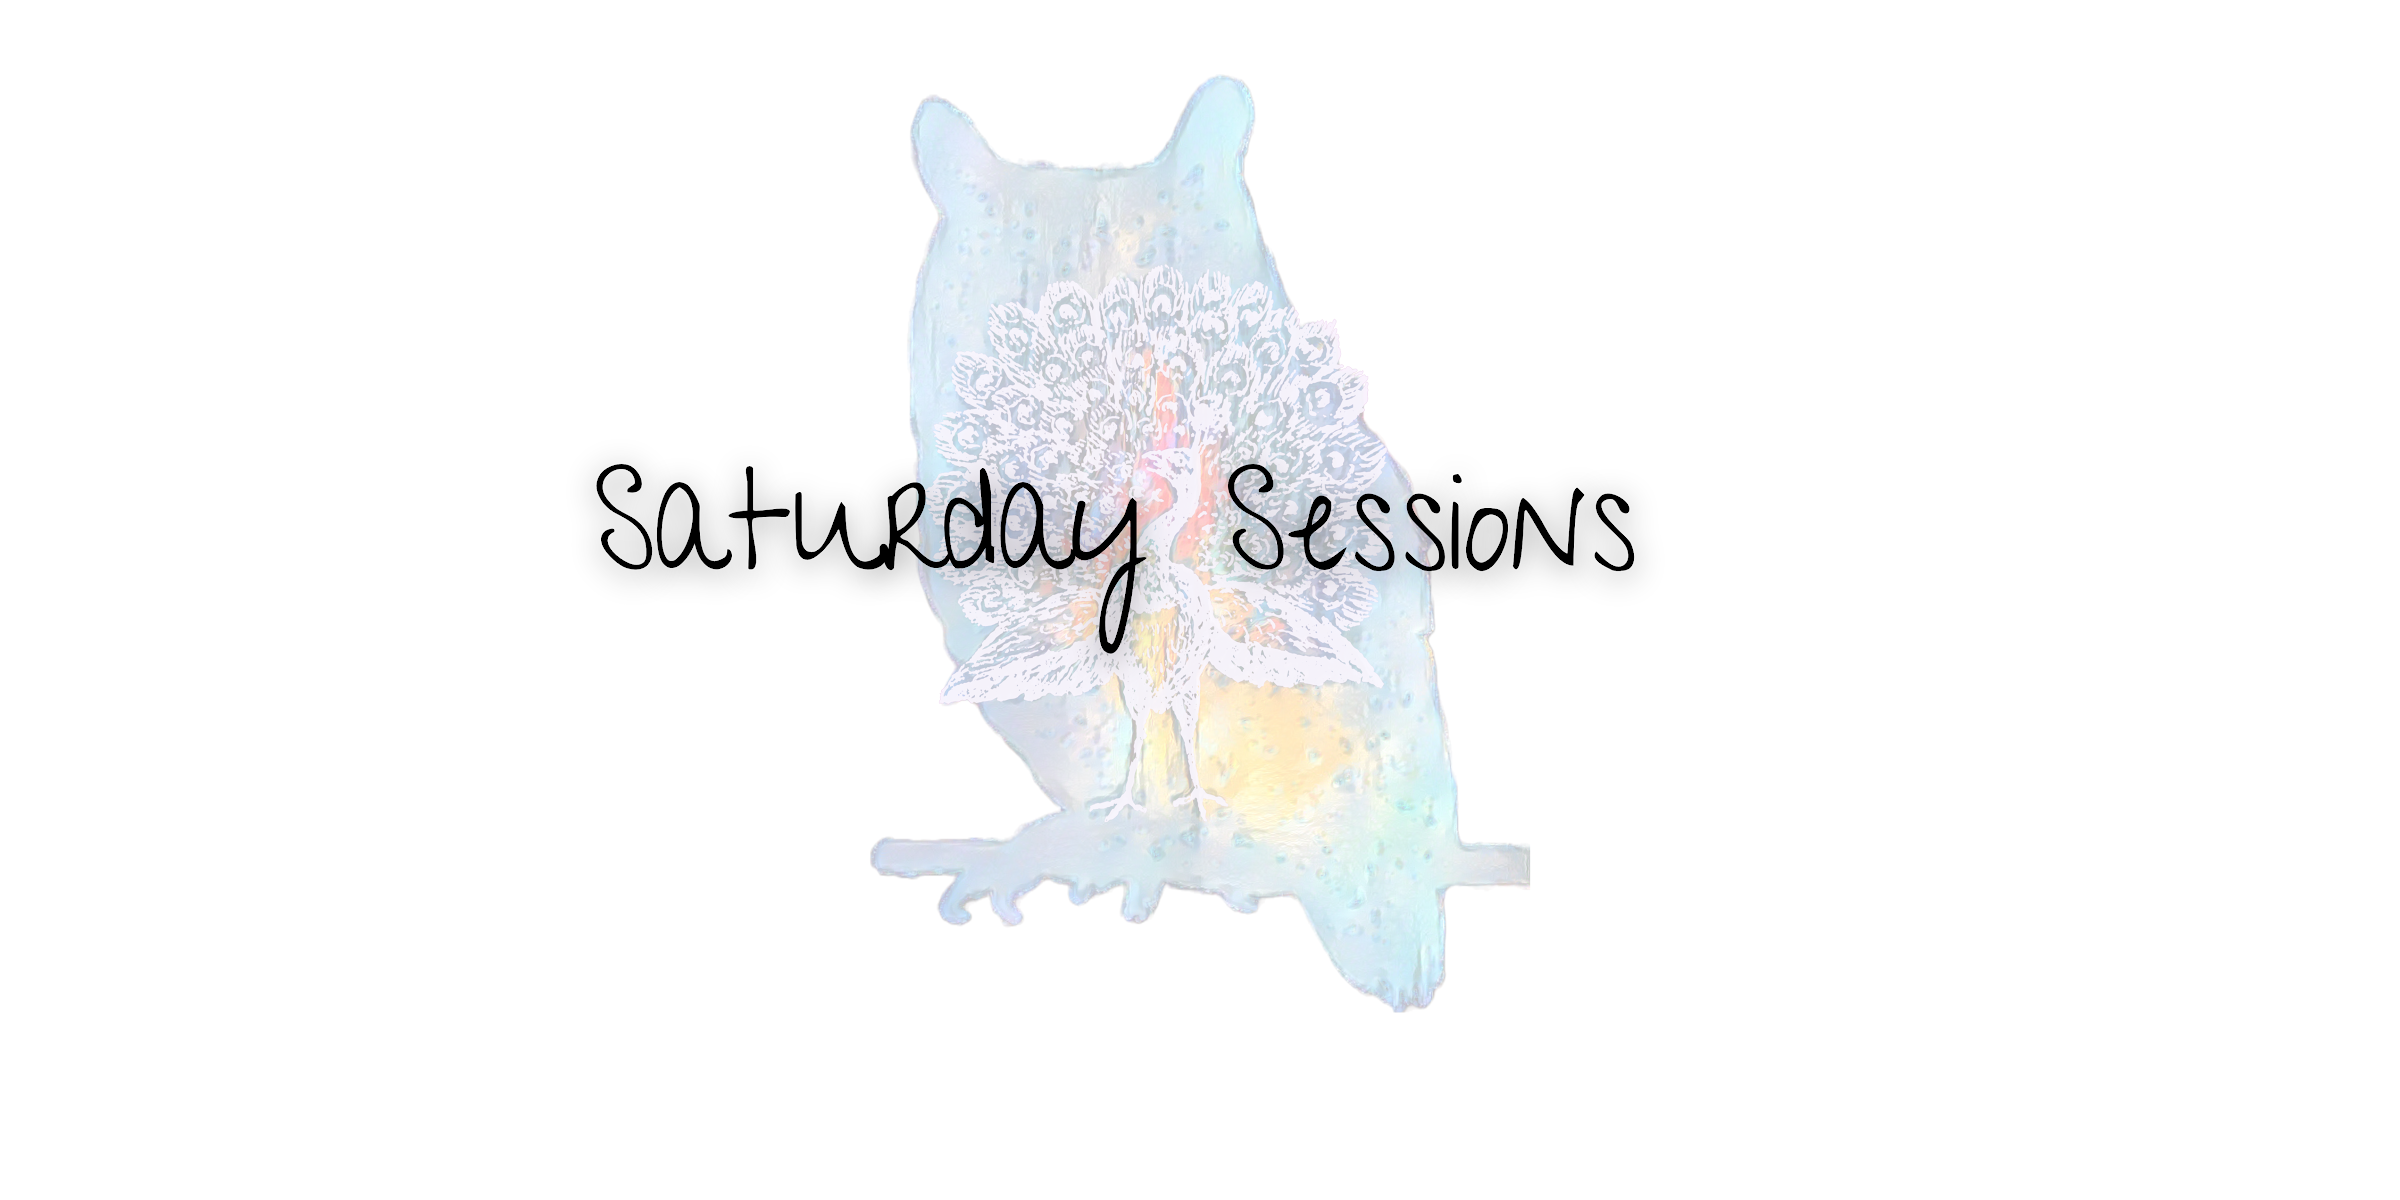 Saturday Sessions: ADHD and Anxiety, How Medication and Mindfulness Helped Me Connect with My Spirituality